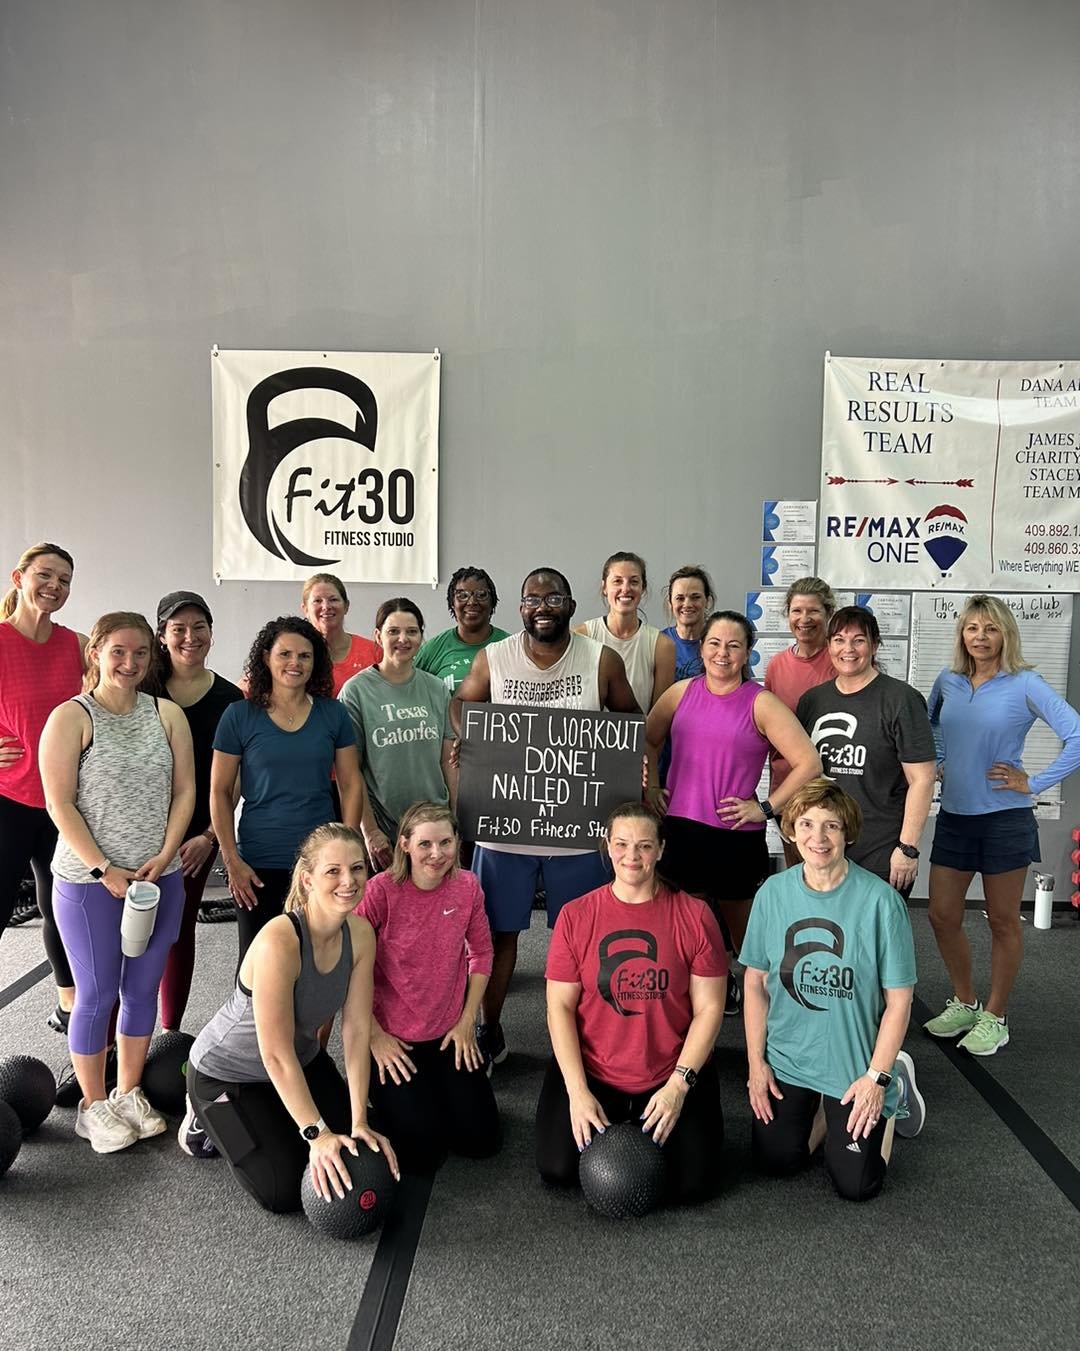 Hope everyone is having a great Saturday so far!!!! 

We had a great start to our Saturday with an excellent workout and welcomed Justin in for his first workout with us!! 

We also had the pleasure of having Kathleen join us for her first workout wi